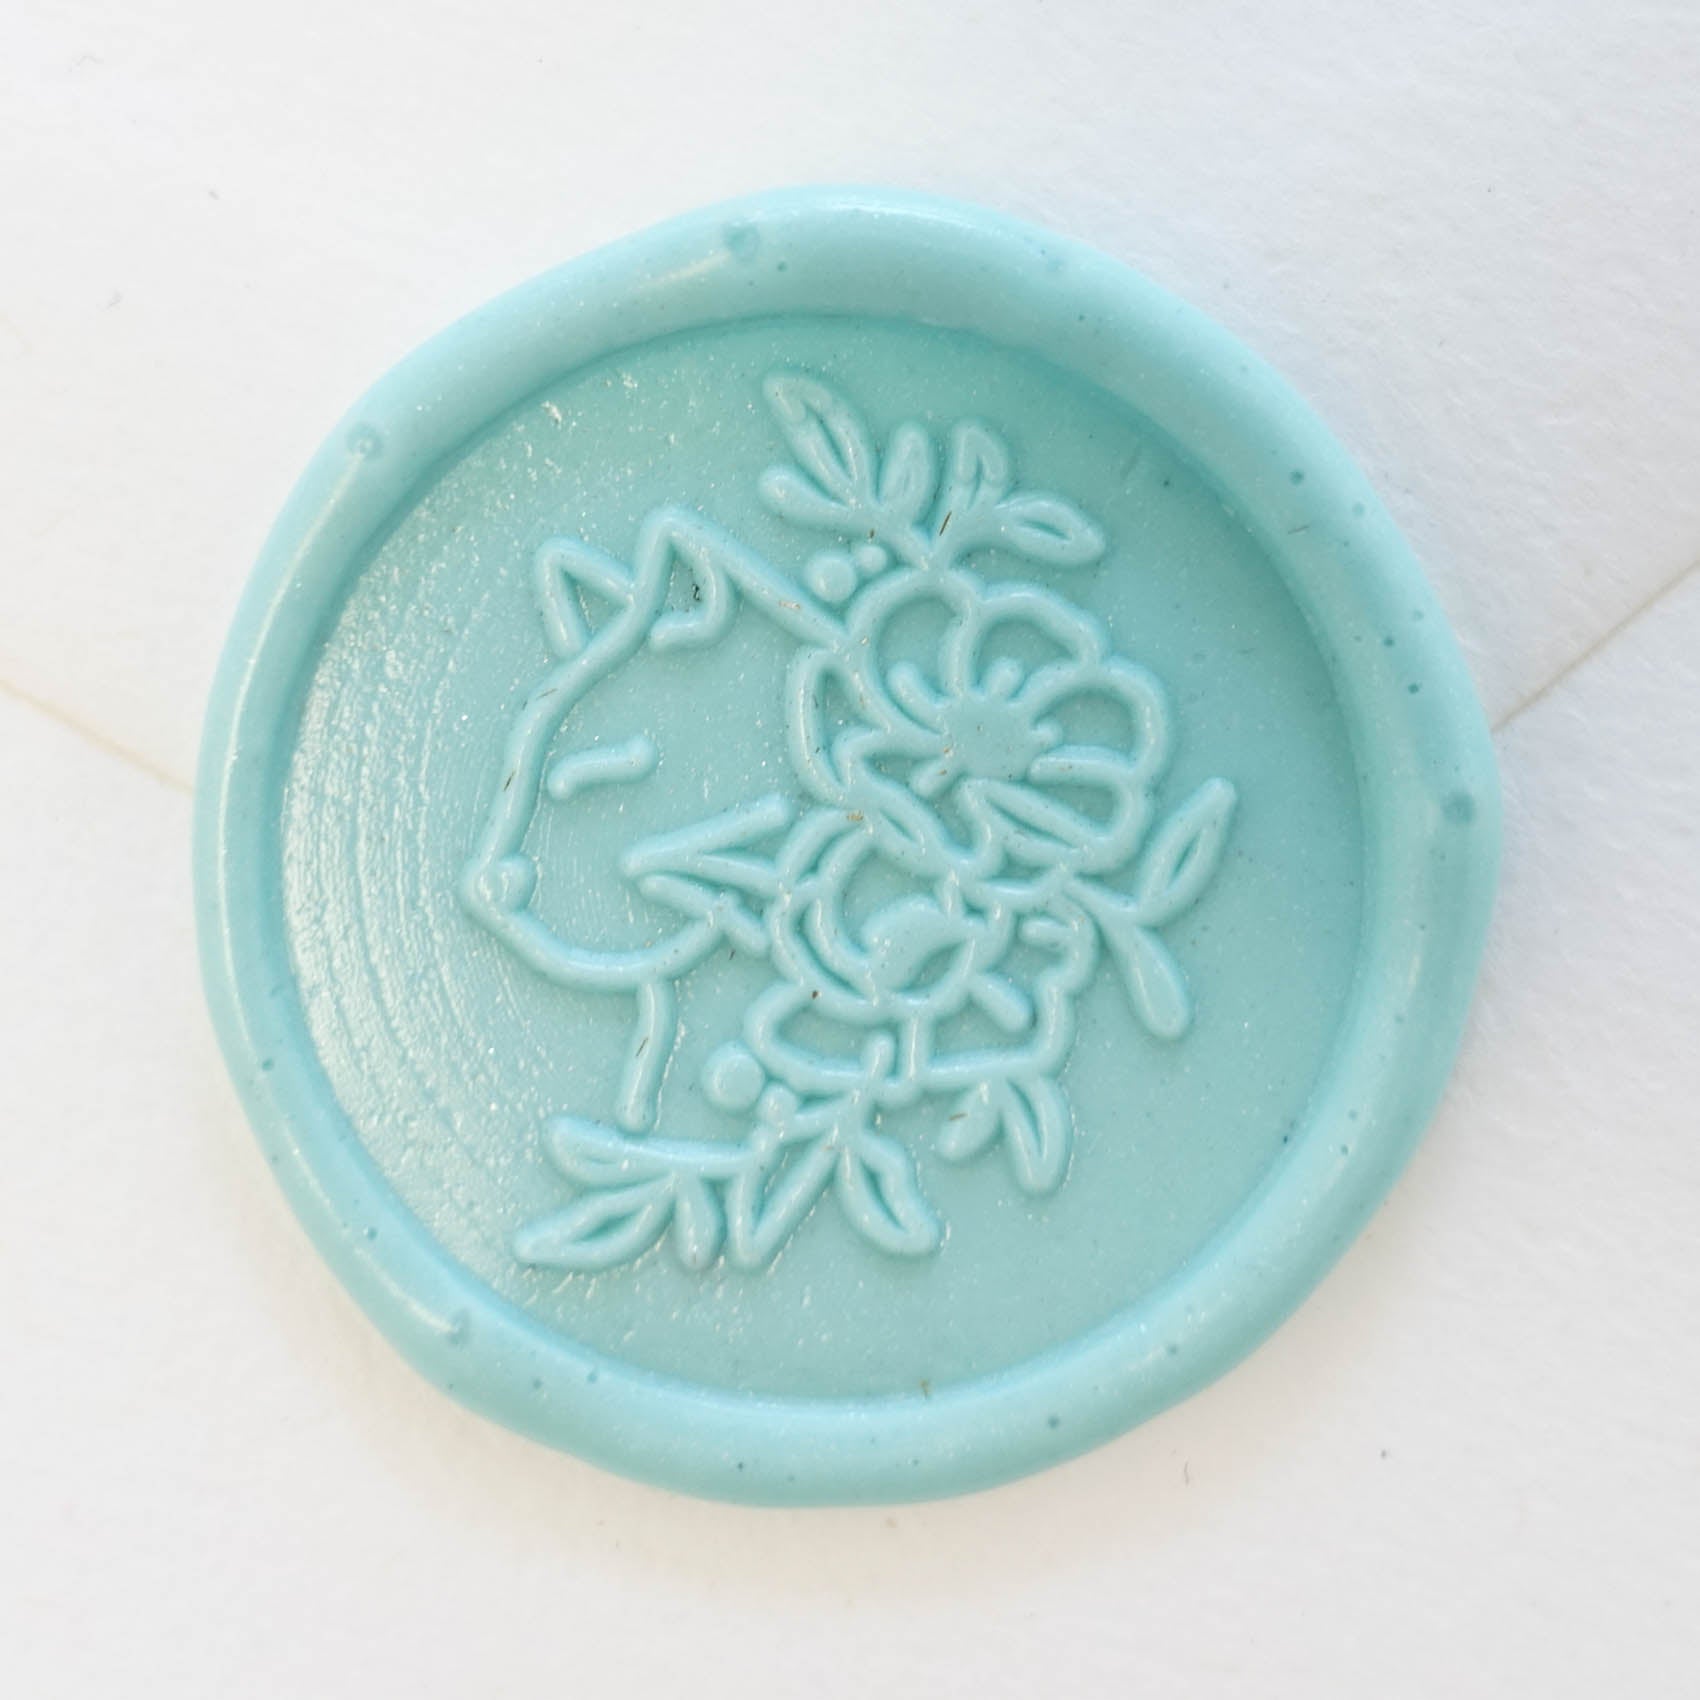 Floral Cat Portrait wax seal stamp, wax seal kit or stamp head